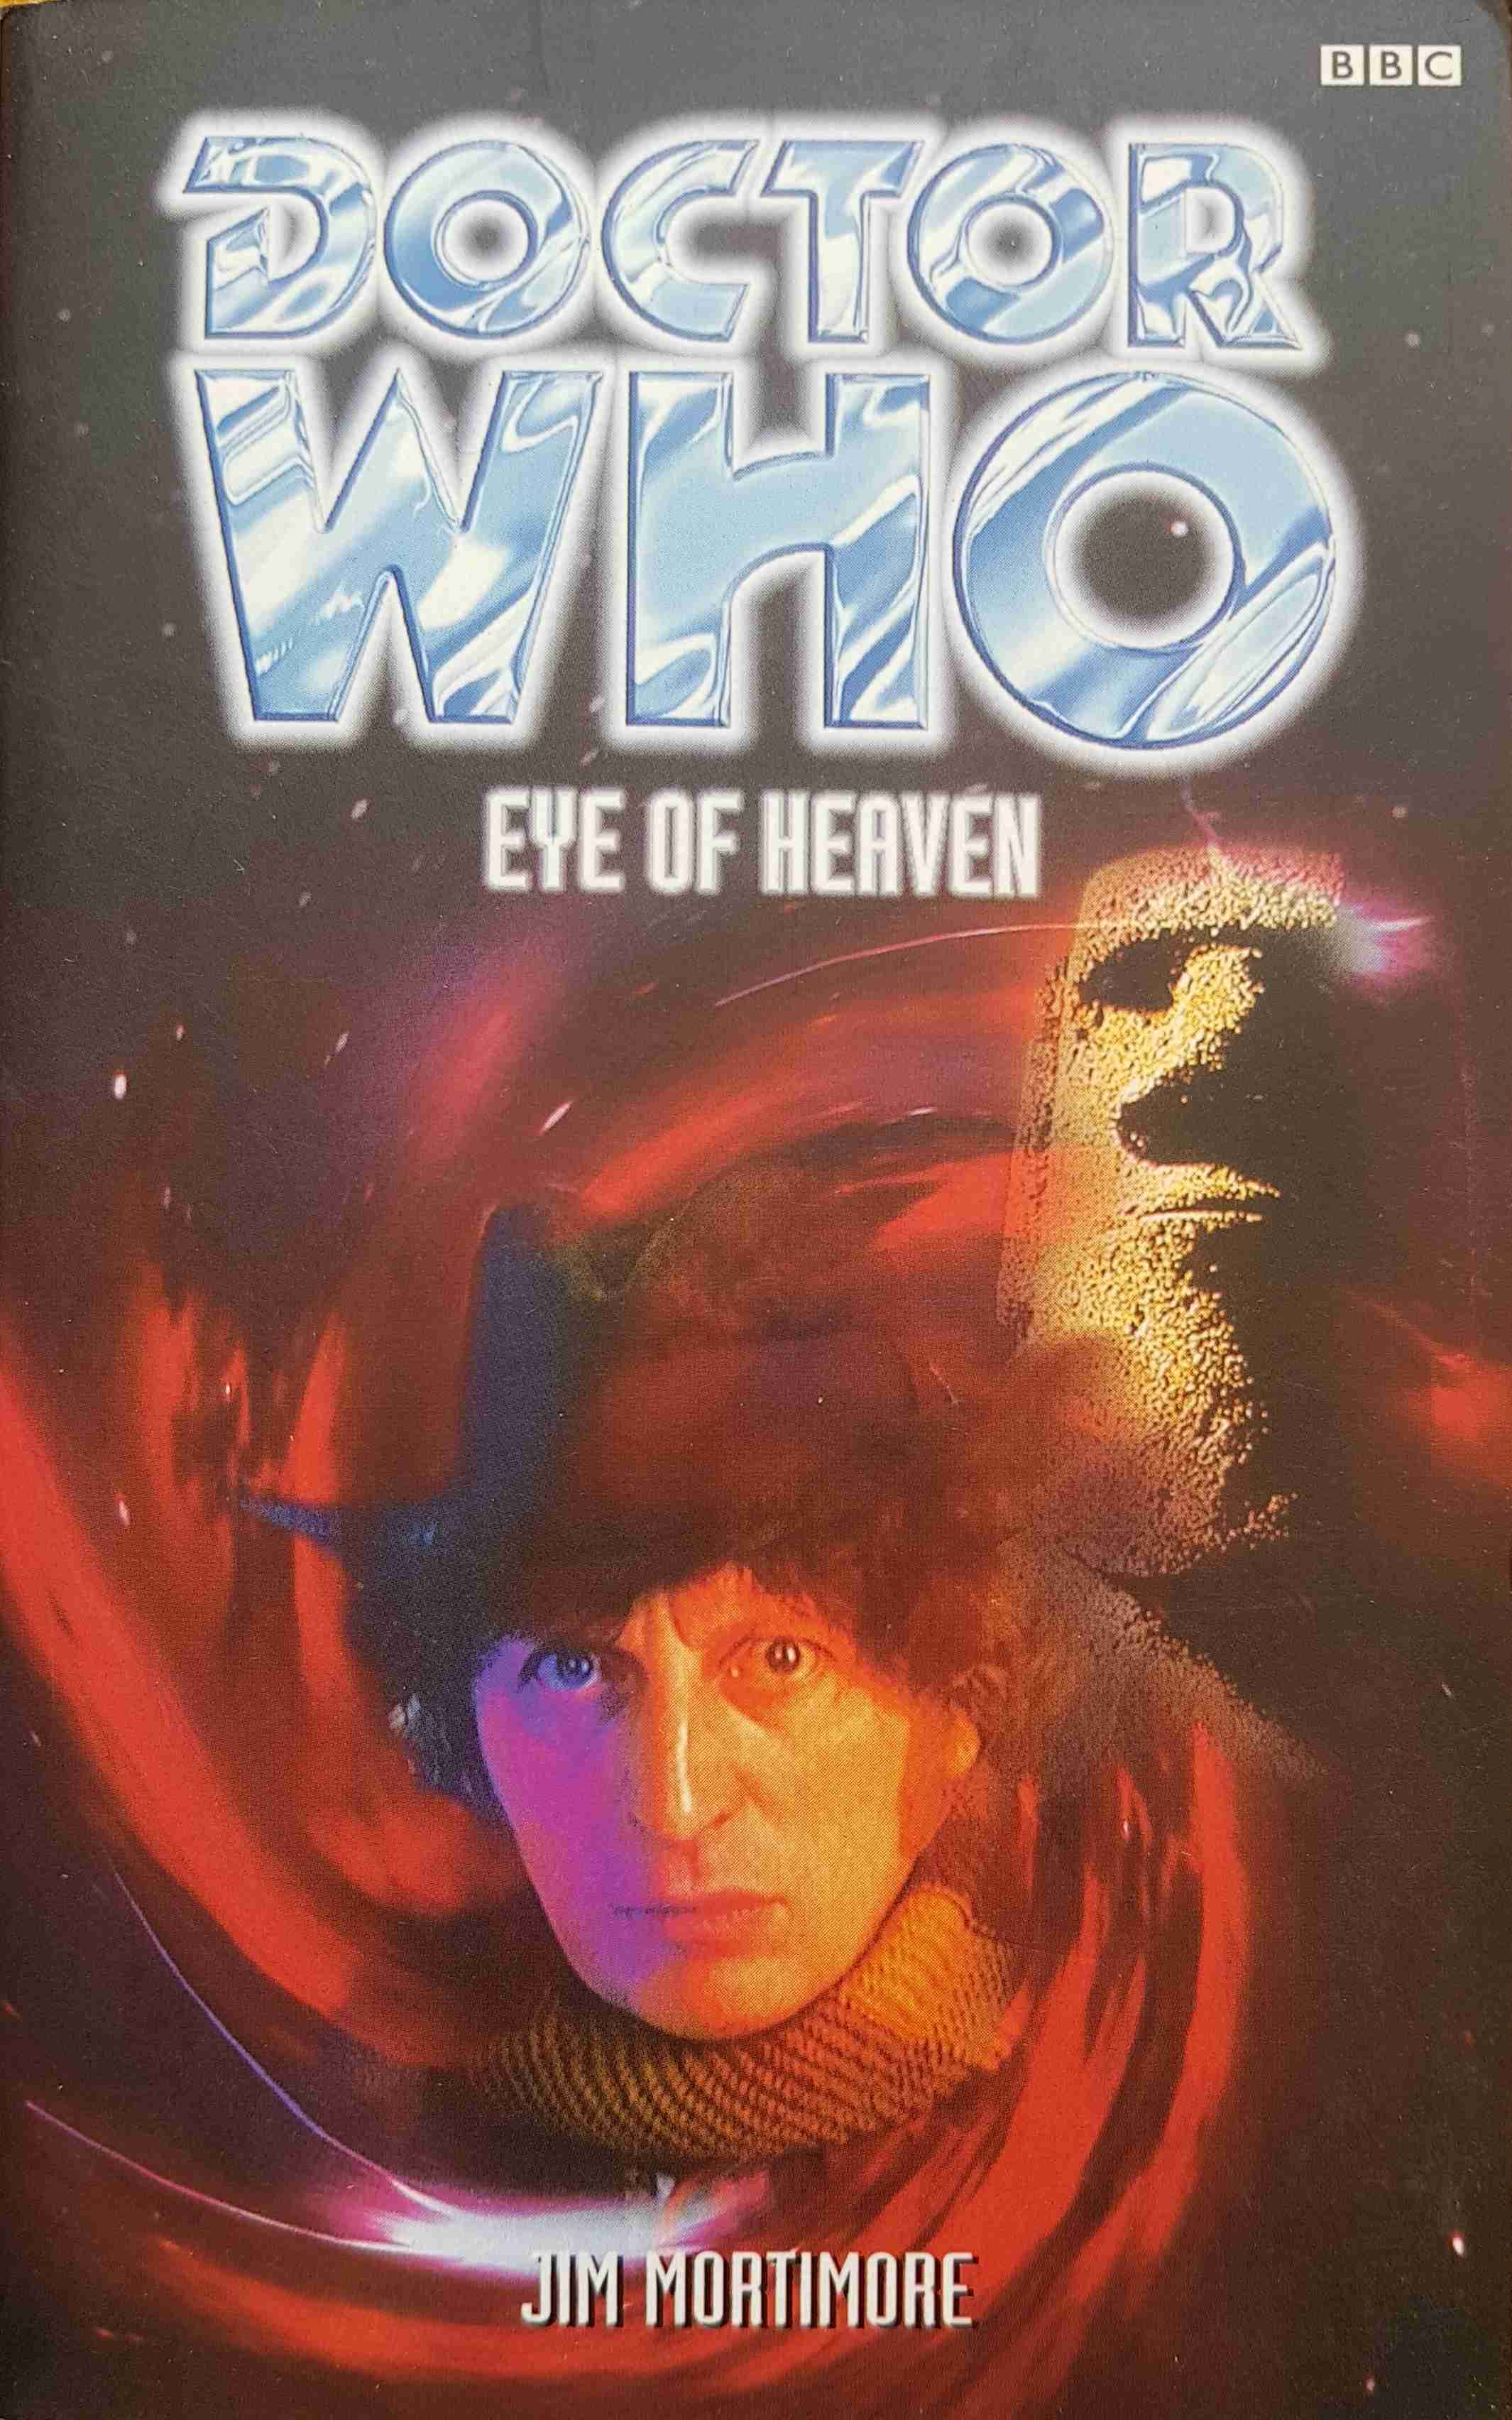 Picture of 0-563-40567-8 Doctor Who - Eye of Heaven by artist Jim Mortimore from the BBC records and Tapes library